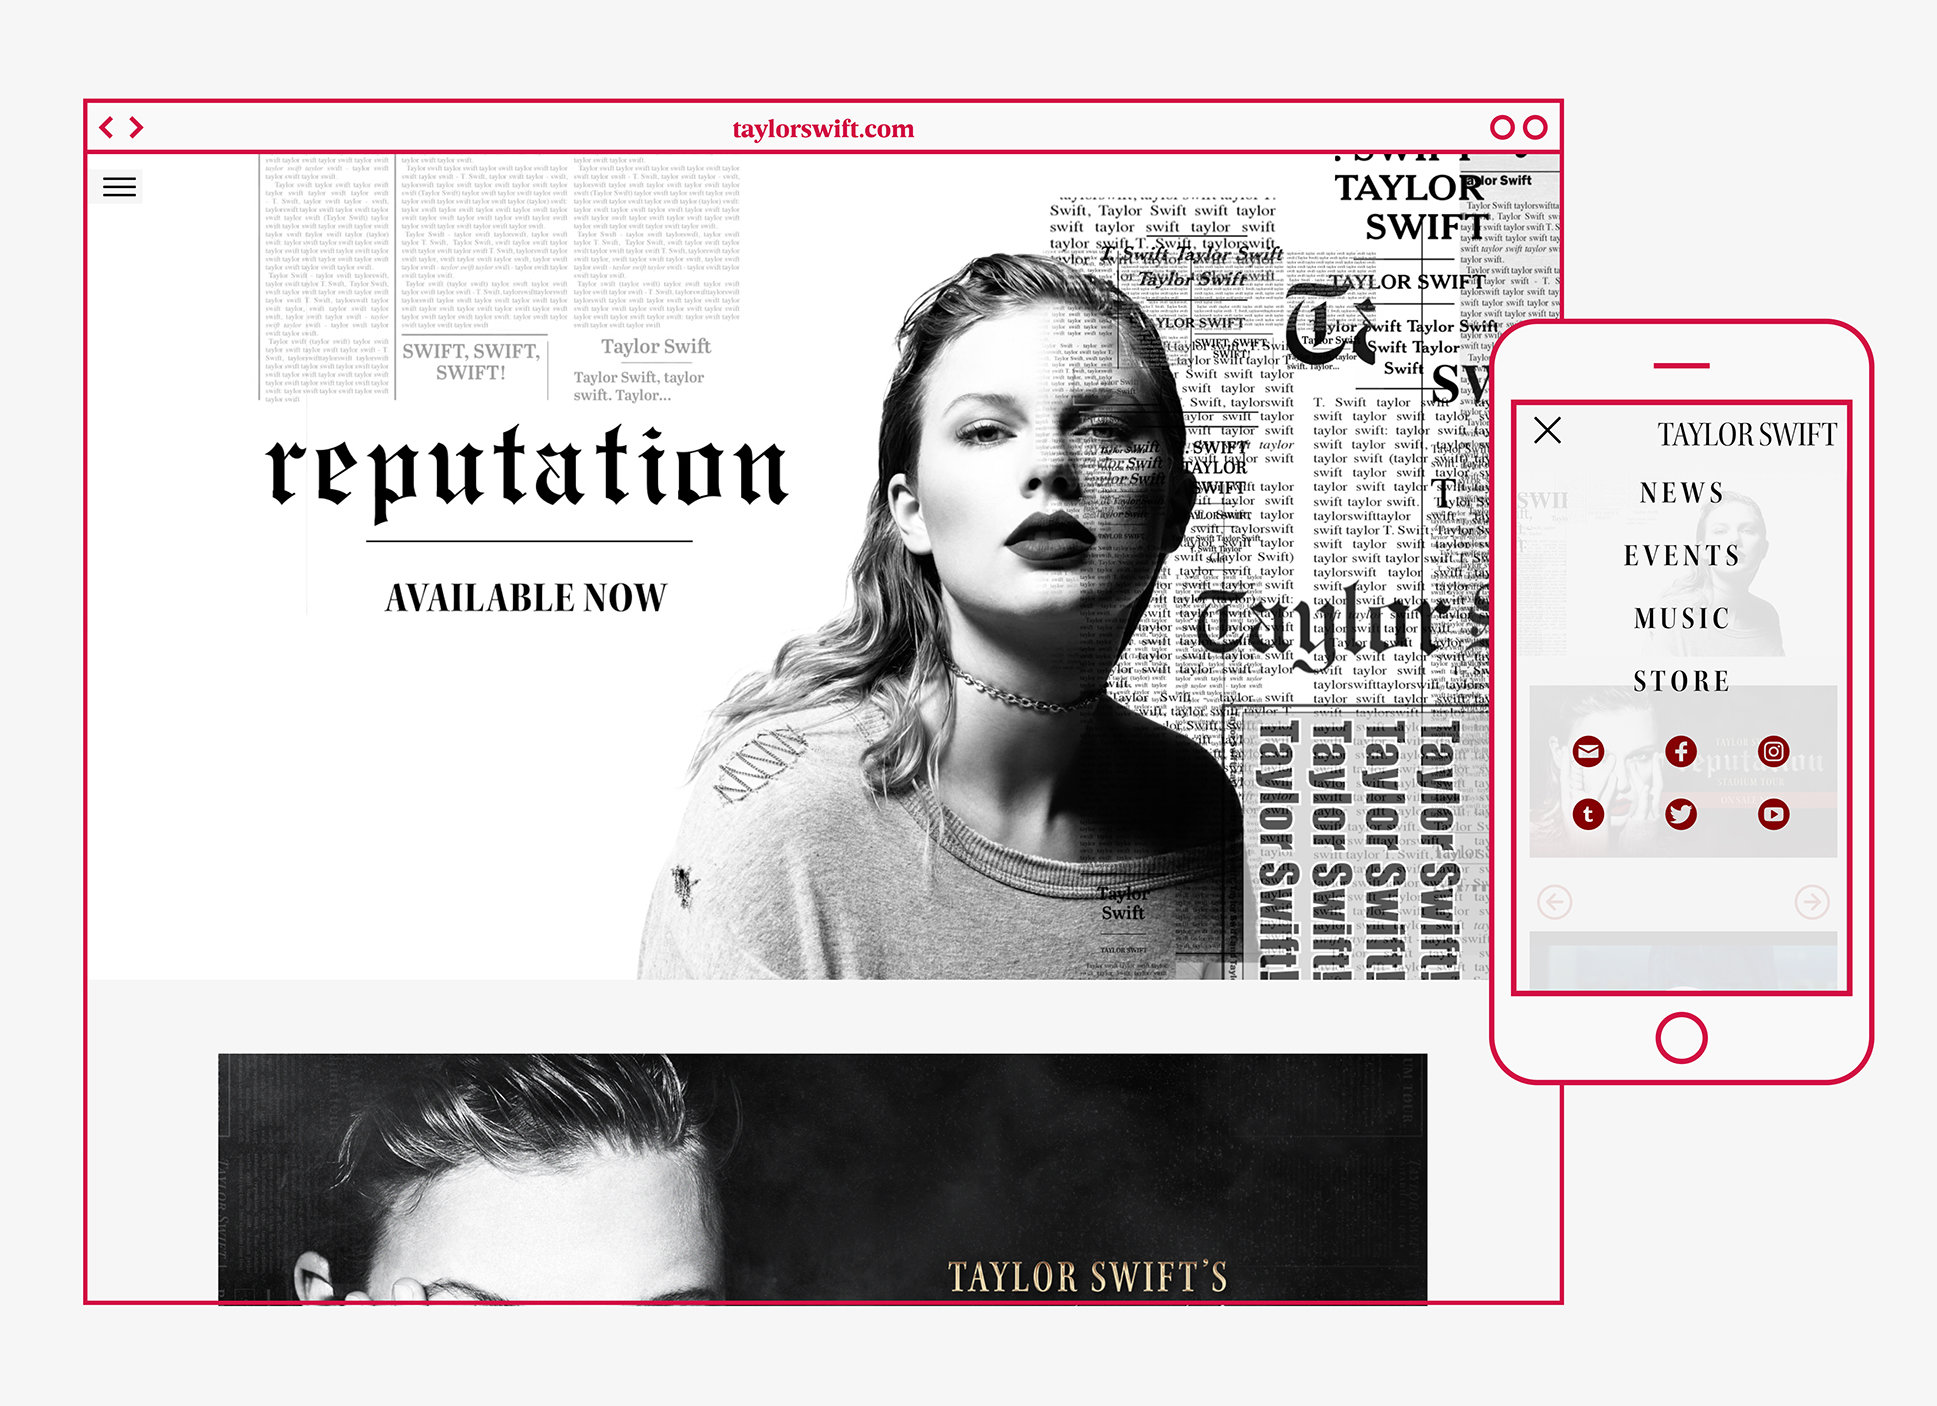 browser window and mobile device featuring taylorswift.com reputation header video